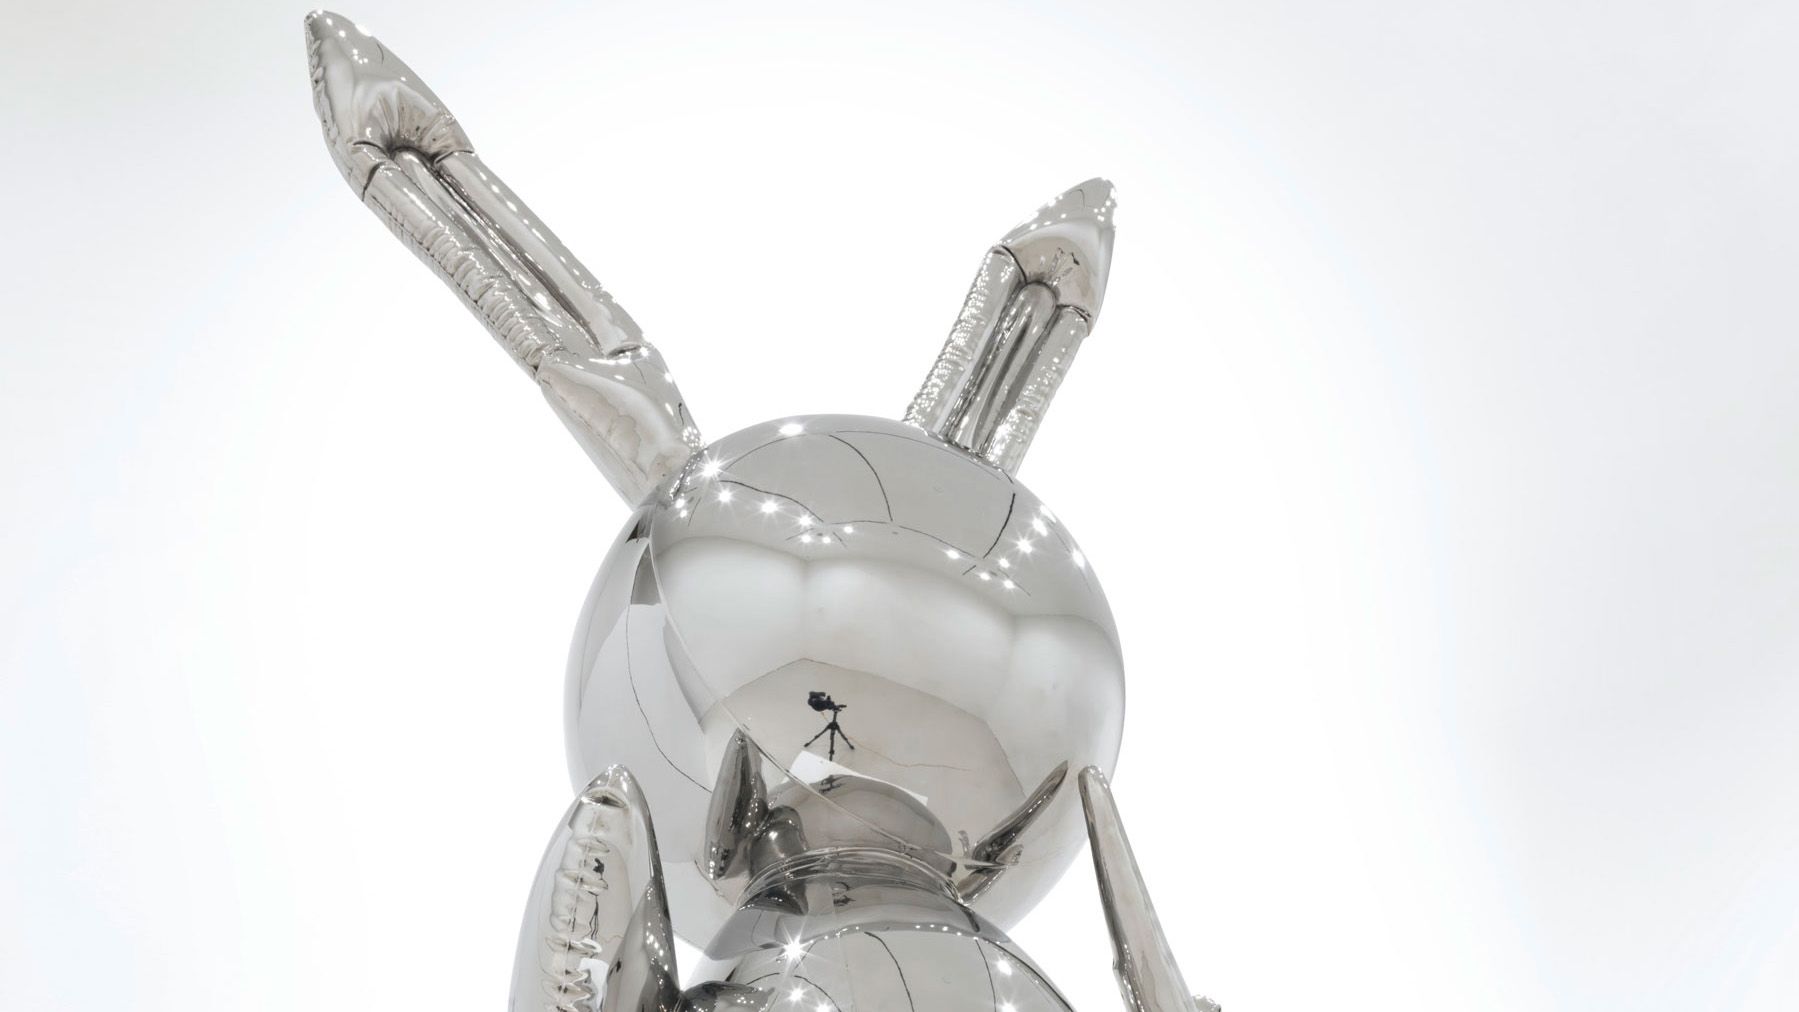 Jeff Koons' Rabbit fetches record $91M at auction